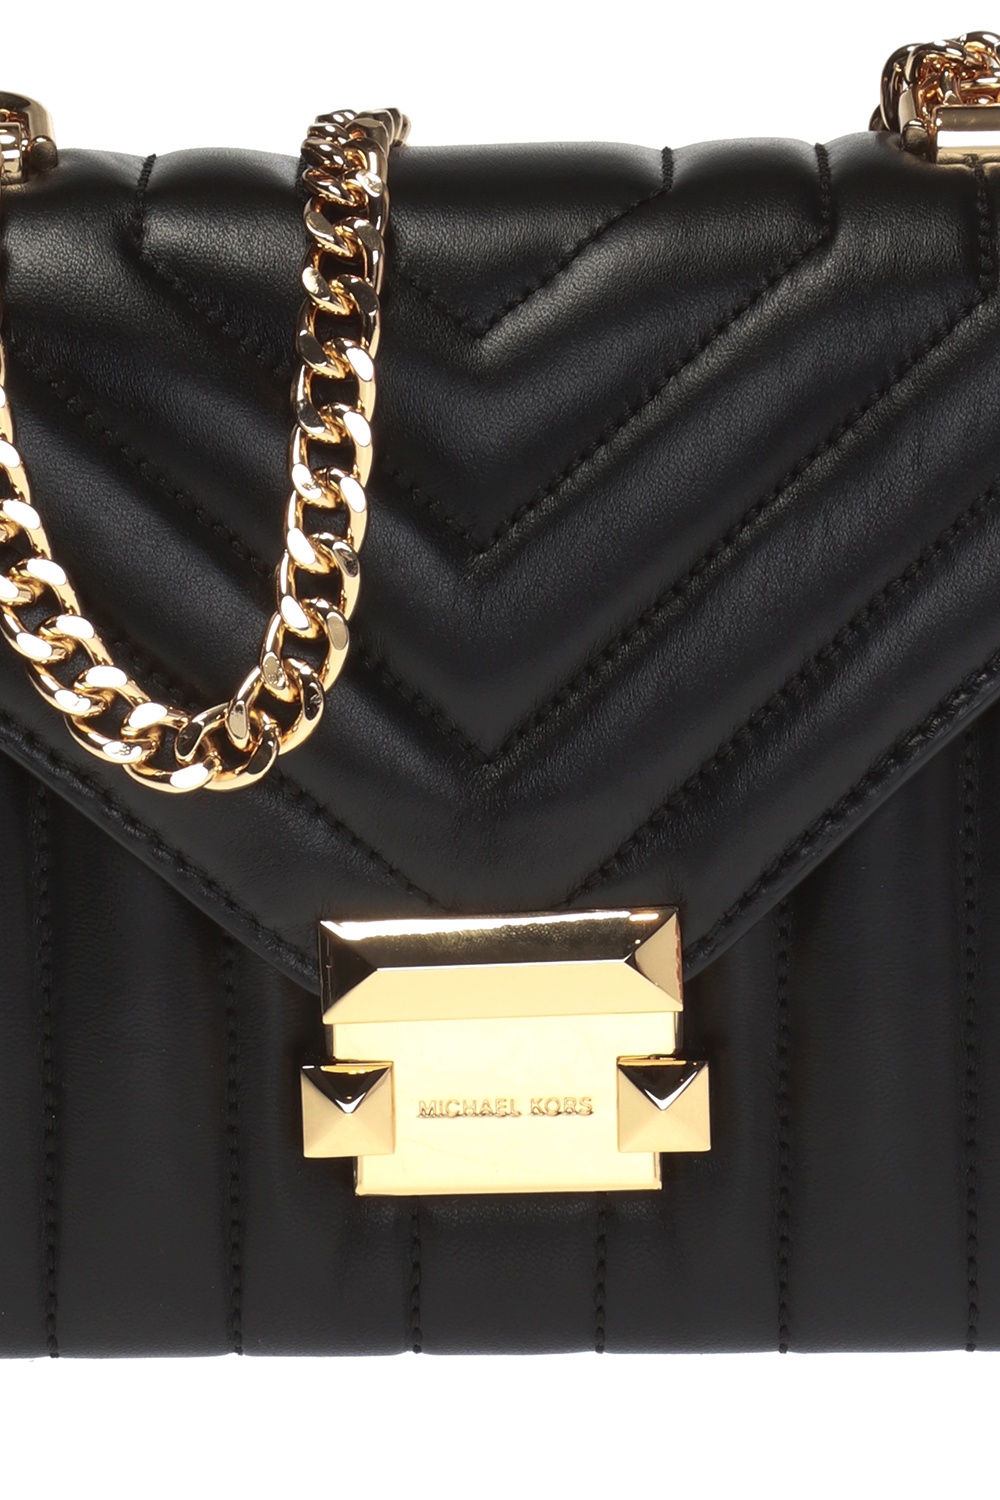 michael kors quilted clutch